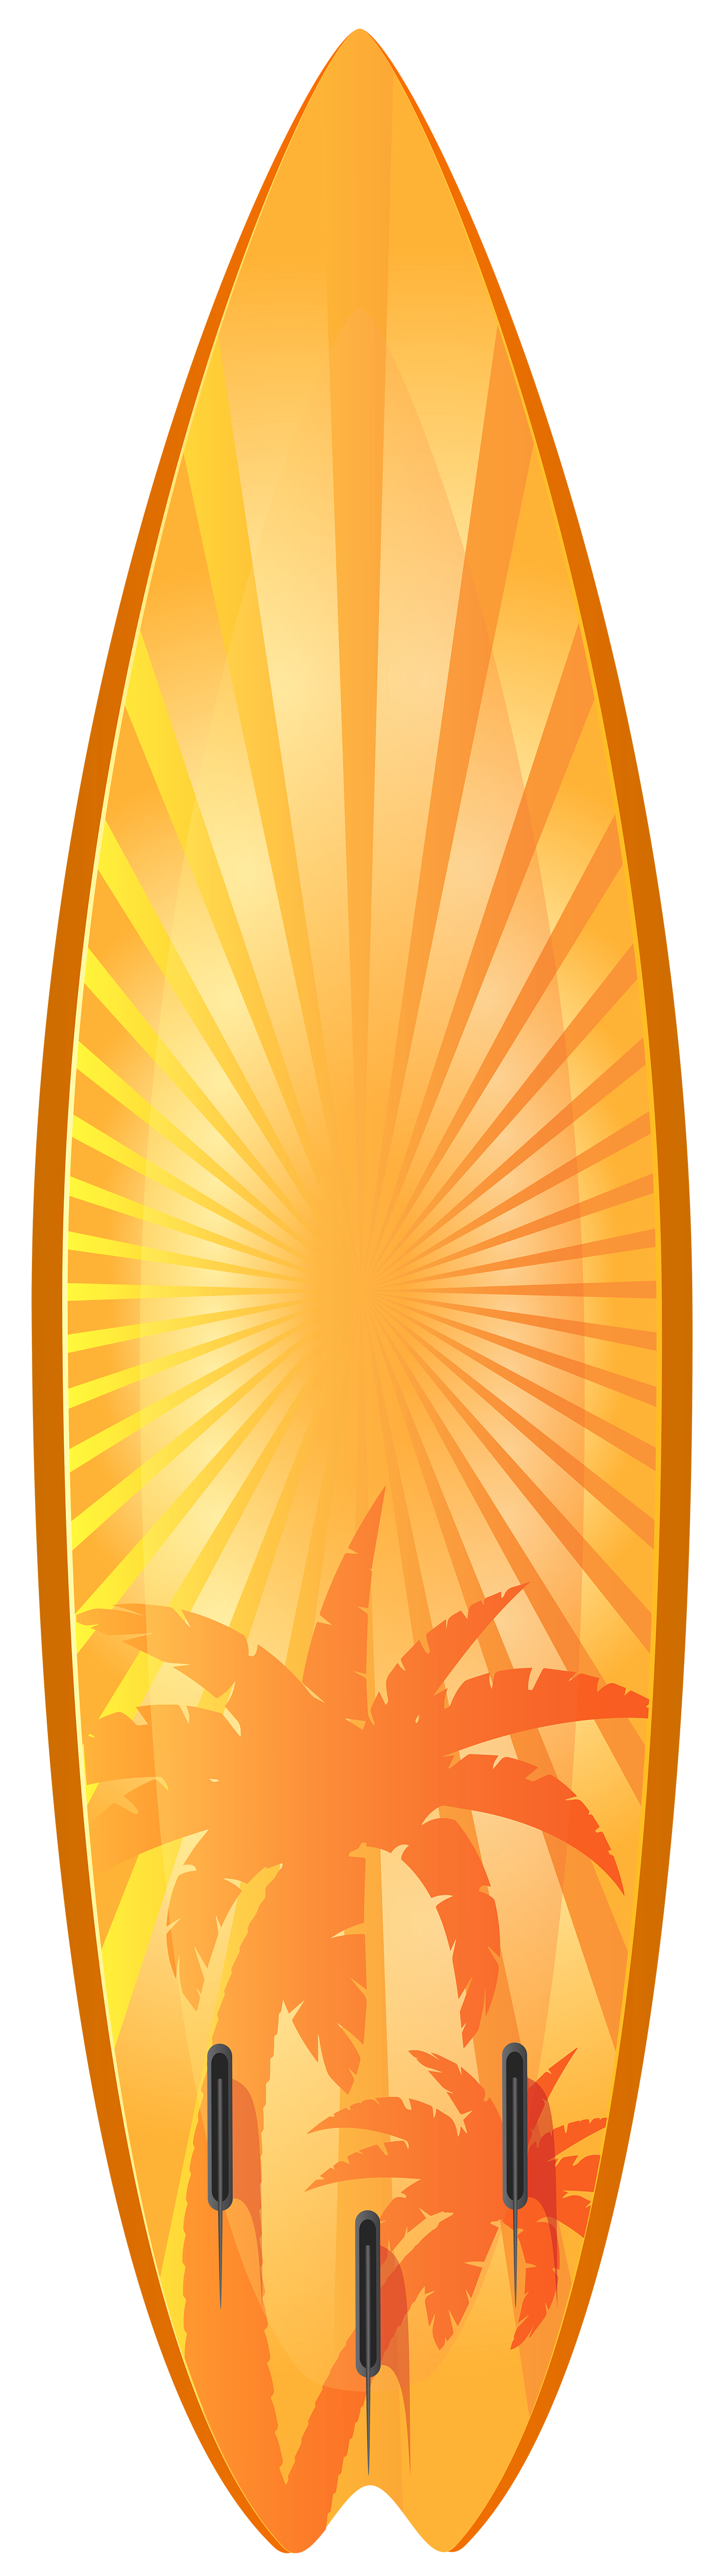 PNG Surfboard - 58144